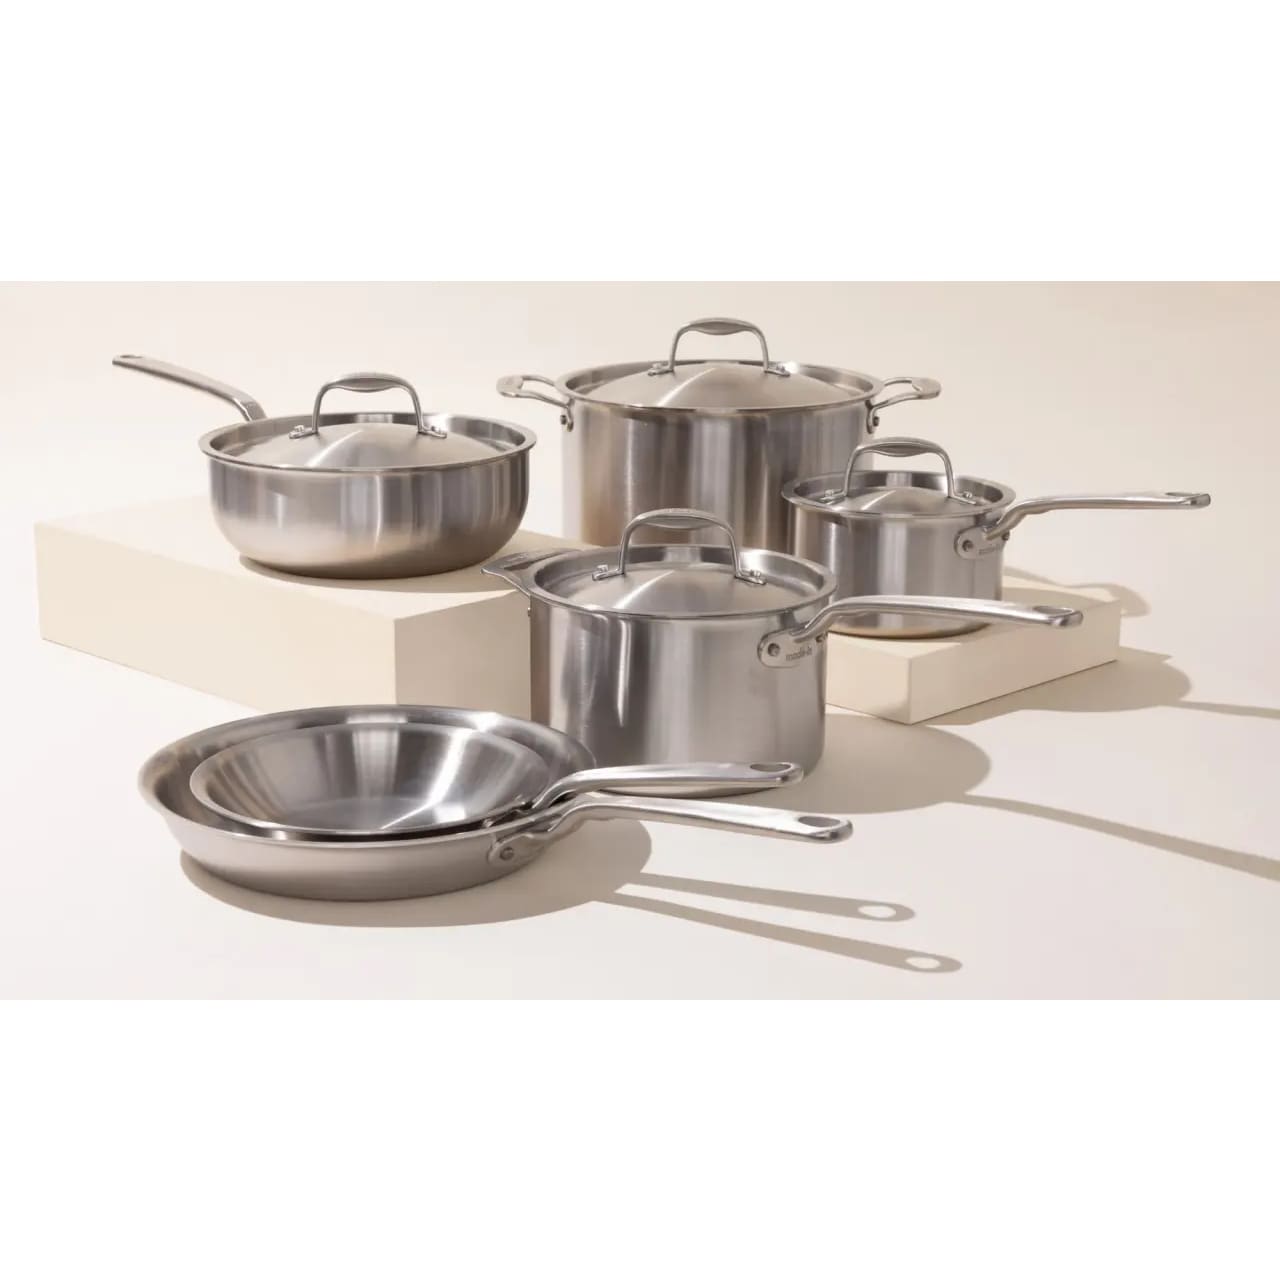 https://cdn.apartmenttherapy.info/image/upload/v1701804718/gen-workflow/product-database/made-in-10-piece-cookware-set.jpg